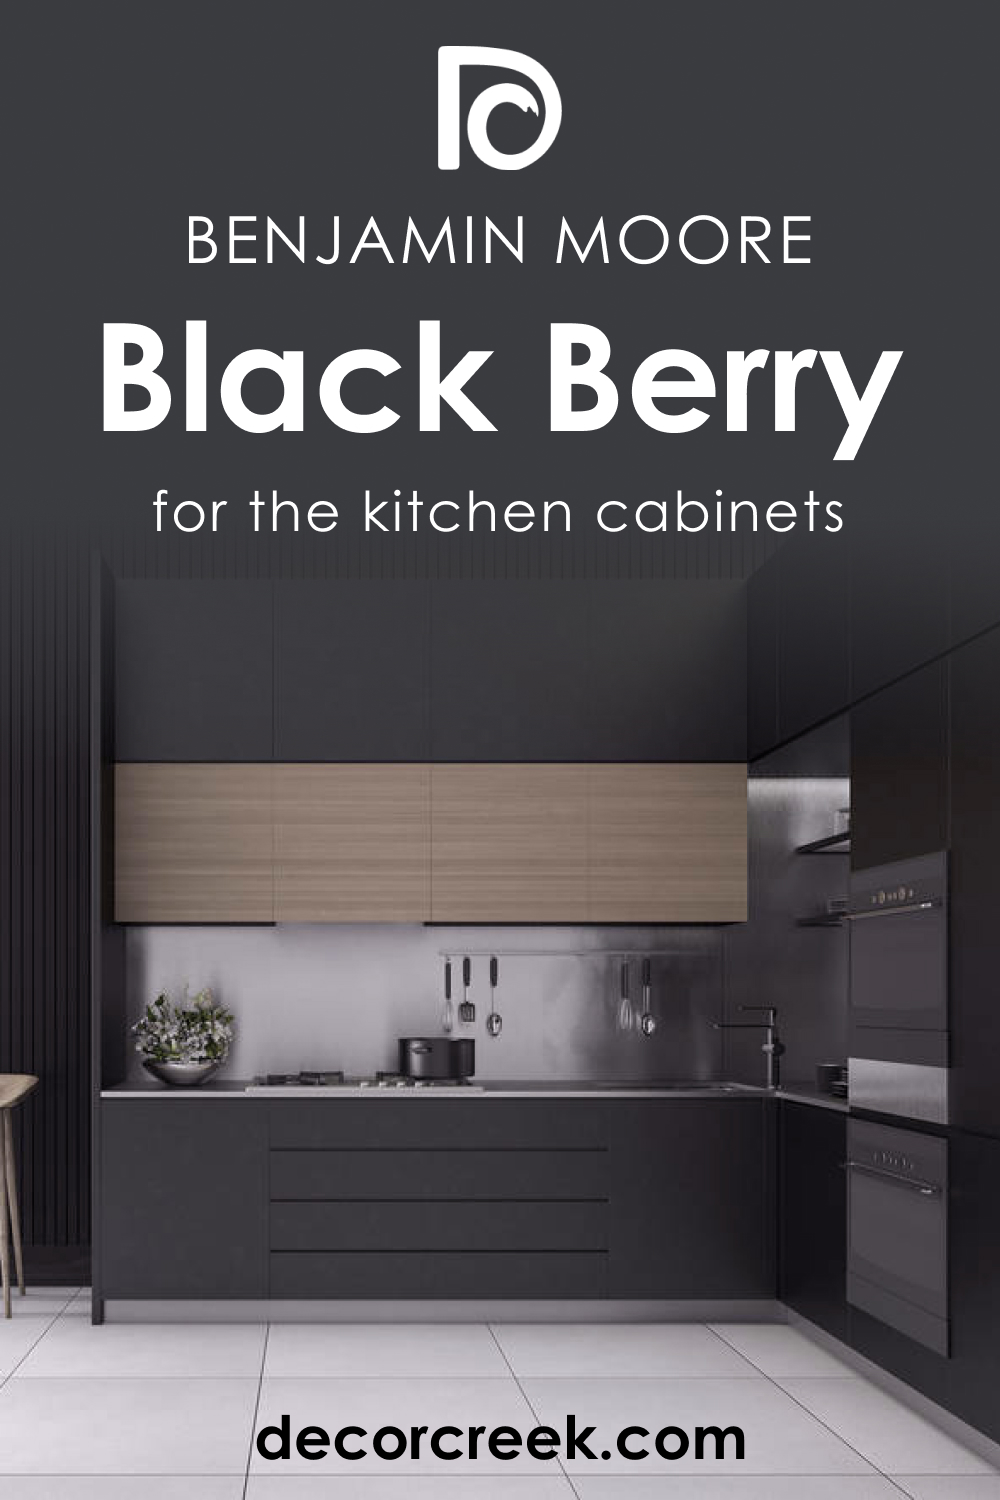 How to Use Black Berry 2119-20 on Kitchen Cabinets?